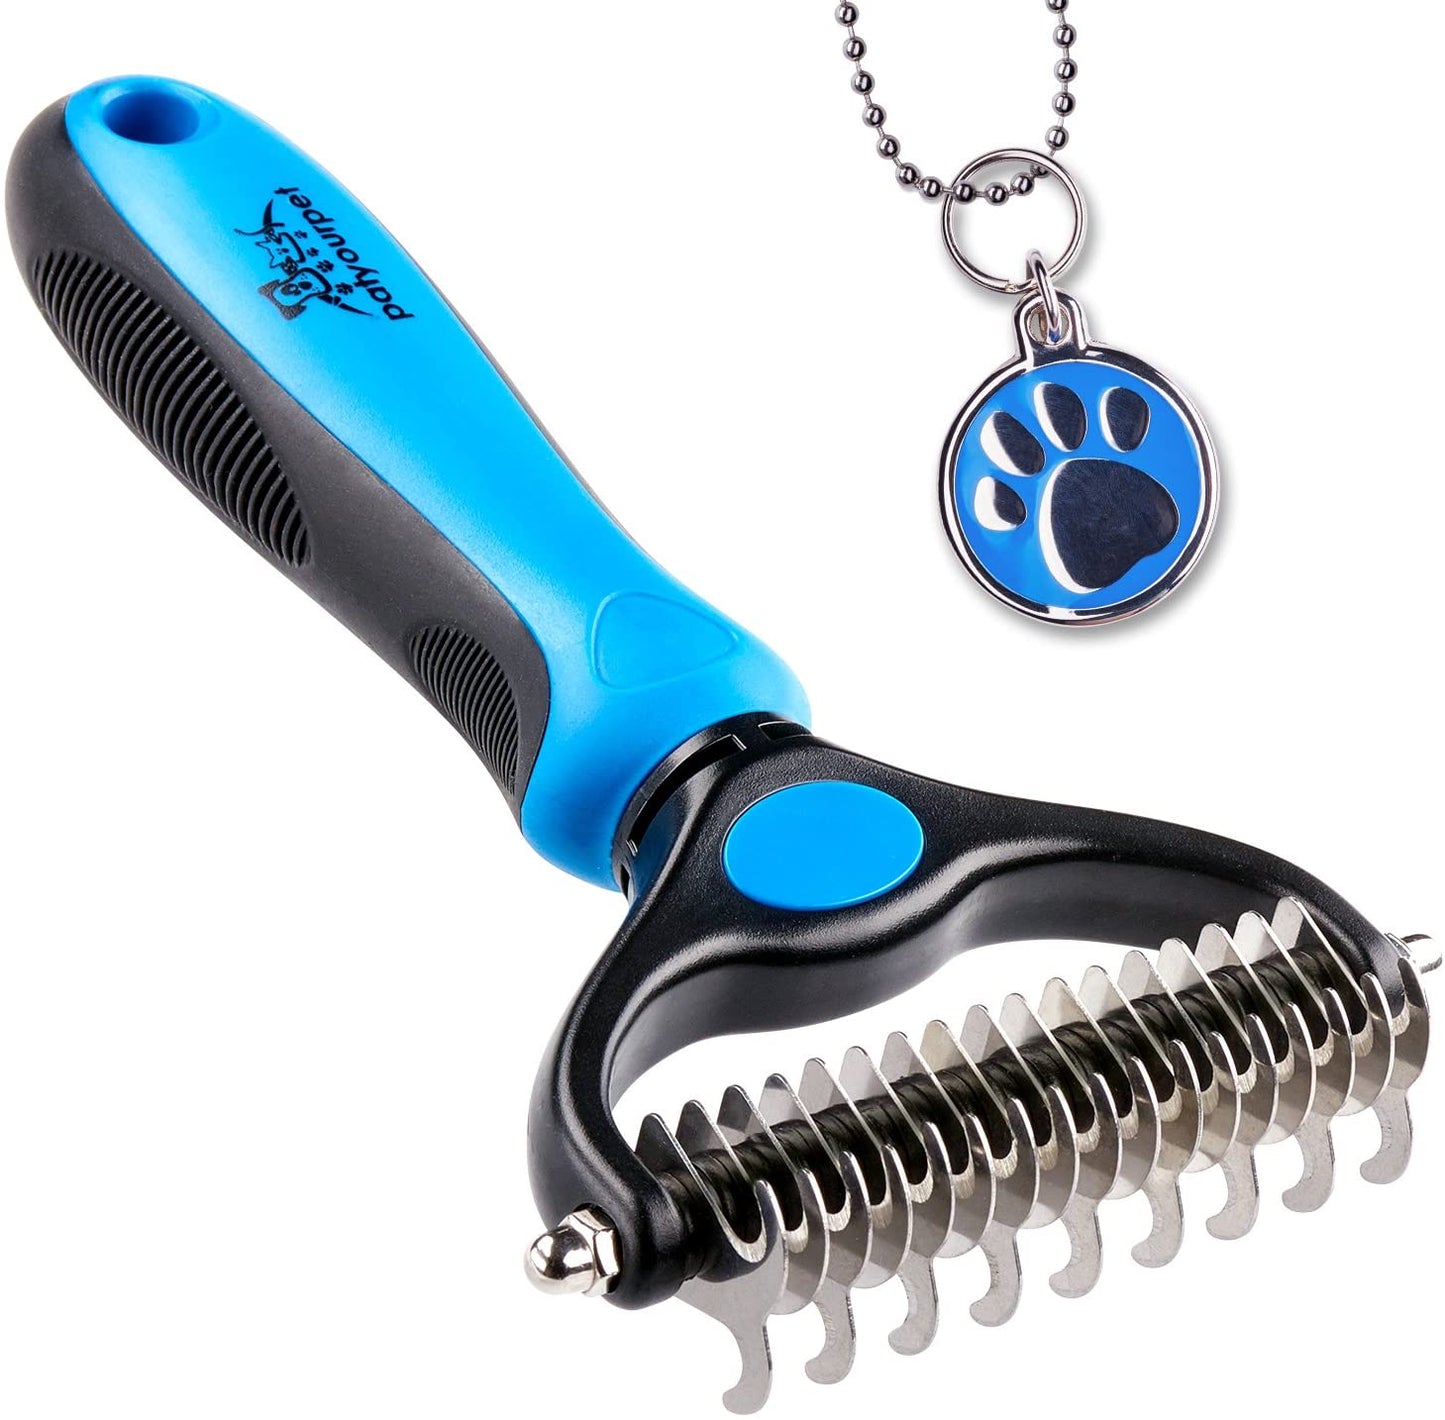 Safe Dematting Comb for Mats Tangles Removing Pet Grooming